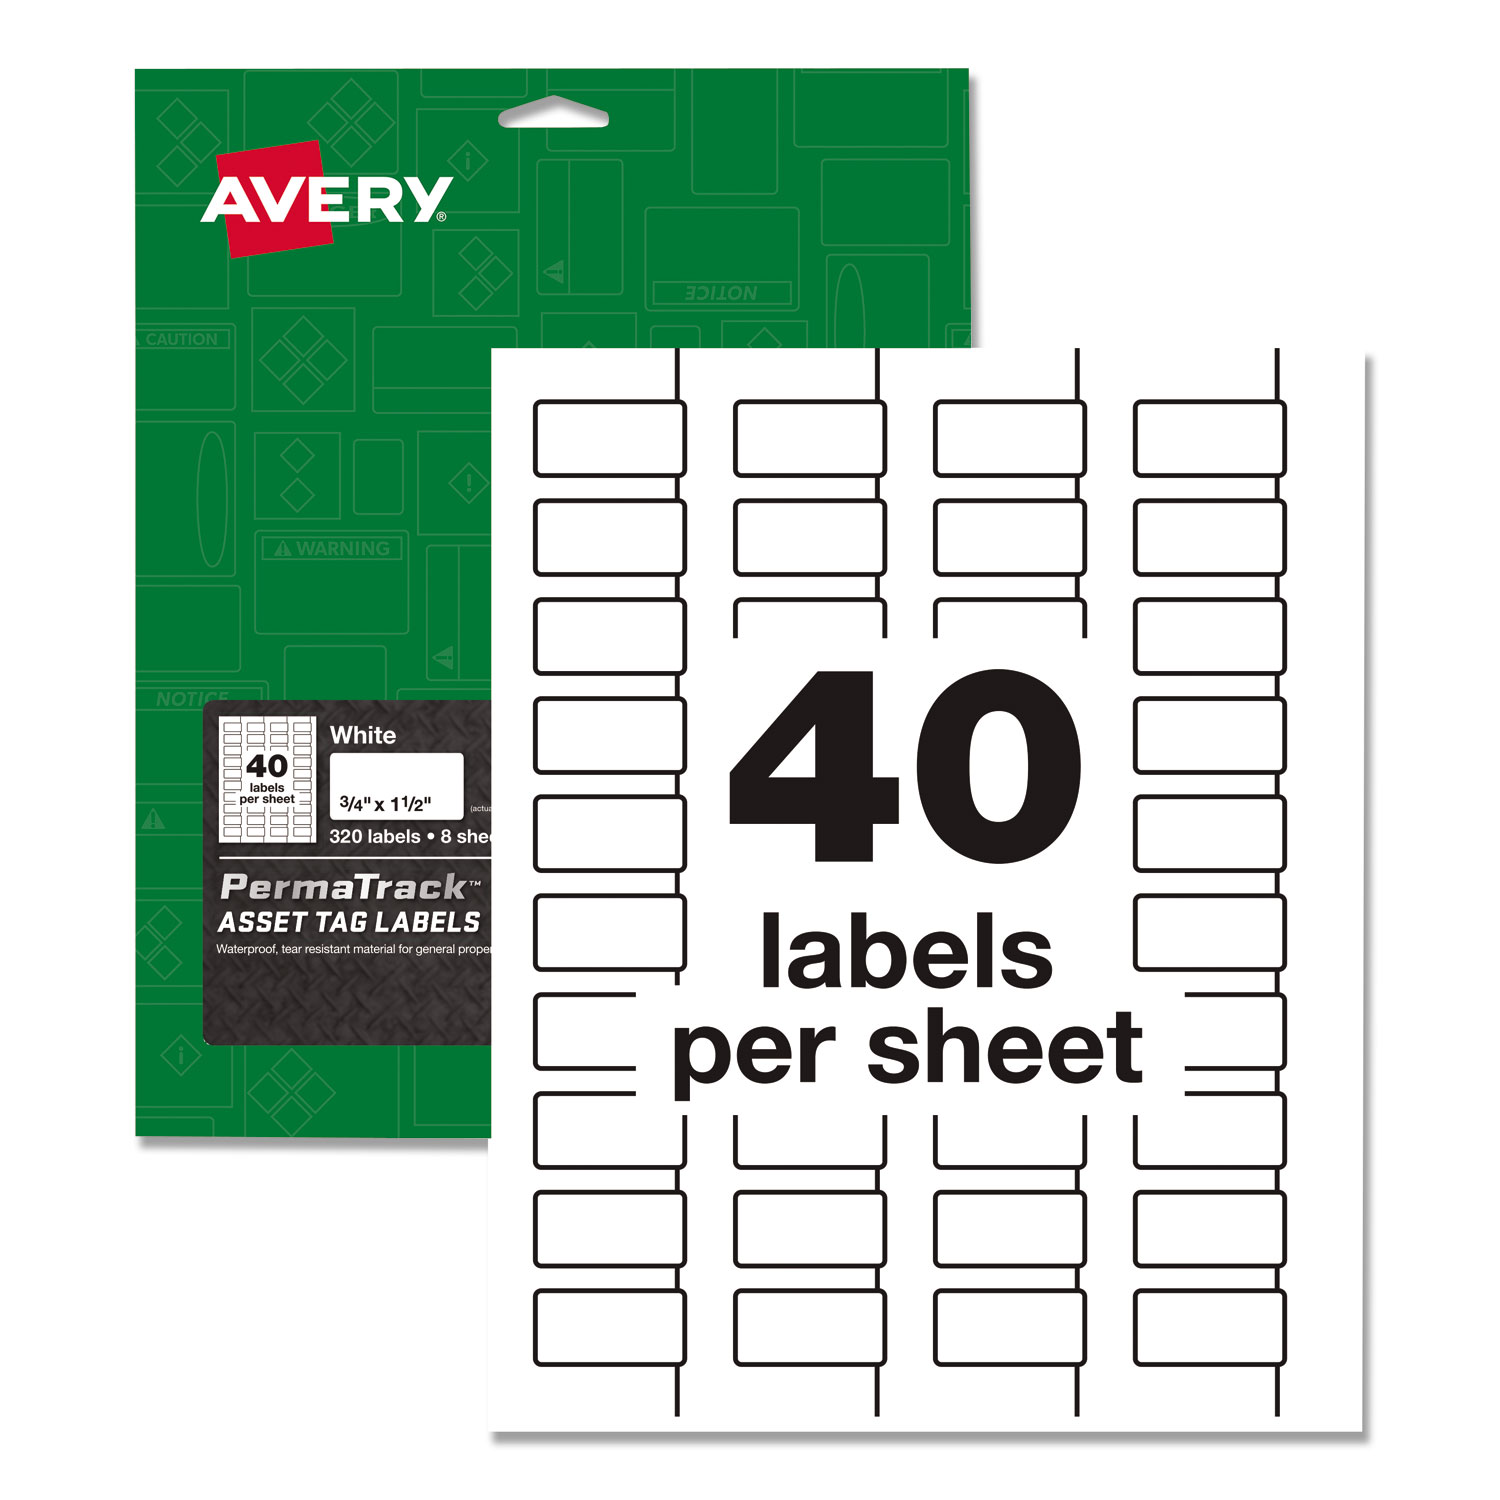  Avery 61525 PermaTrack Durable White Asset Tag Labels, Laser Printers, 0.75 x 1.5, White, 40/Sheet, 8 Sheets/Pack (AVE61525) 